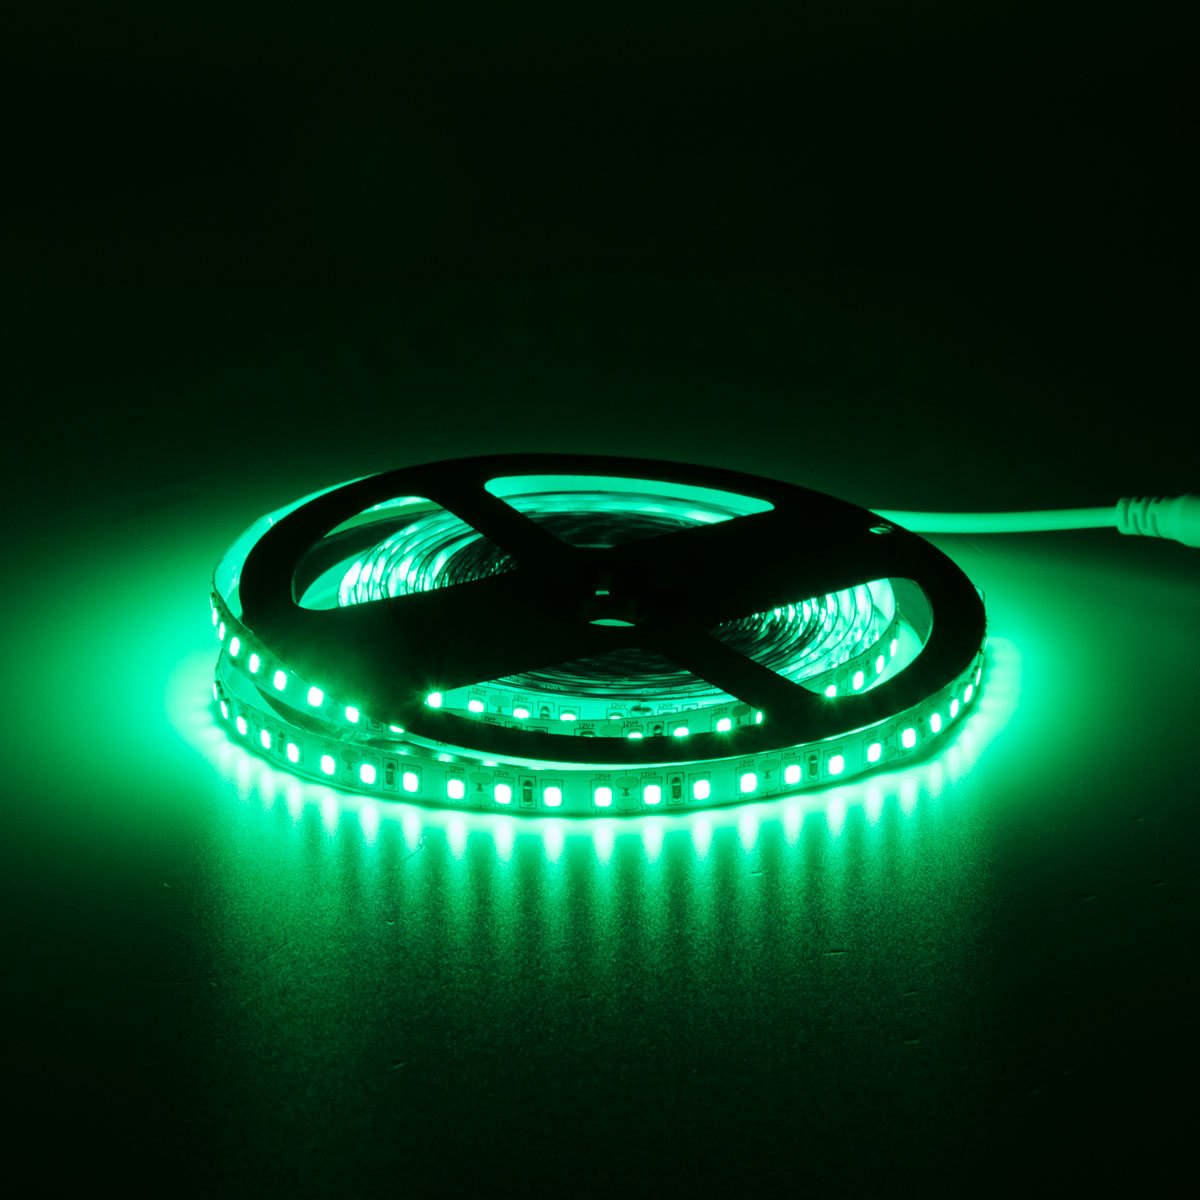 G.W.S LED Wholesale Ltd. LED Strip Lights IP20 (Non-Waterproof) / Green / Strip Only Non-Waterproof IP20 2835 5 Meters 120 LEDs/M LED Strip Light